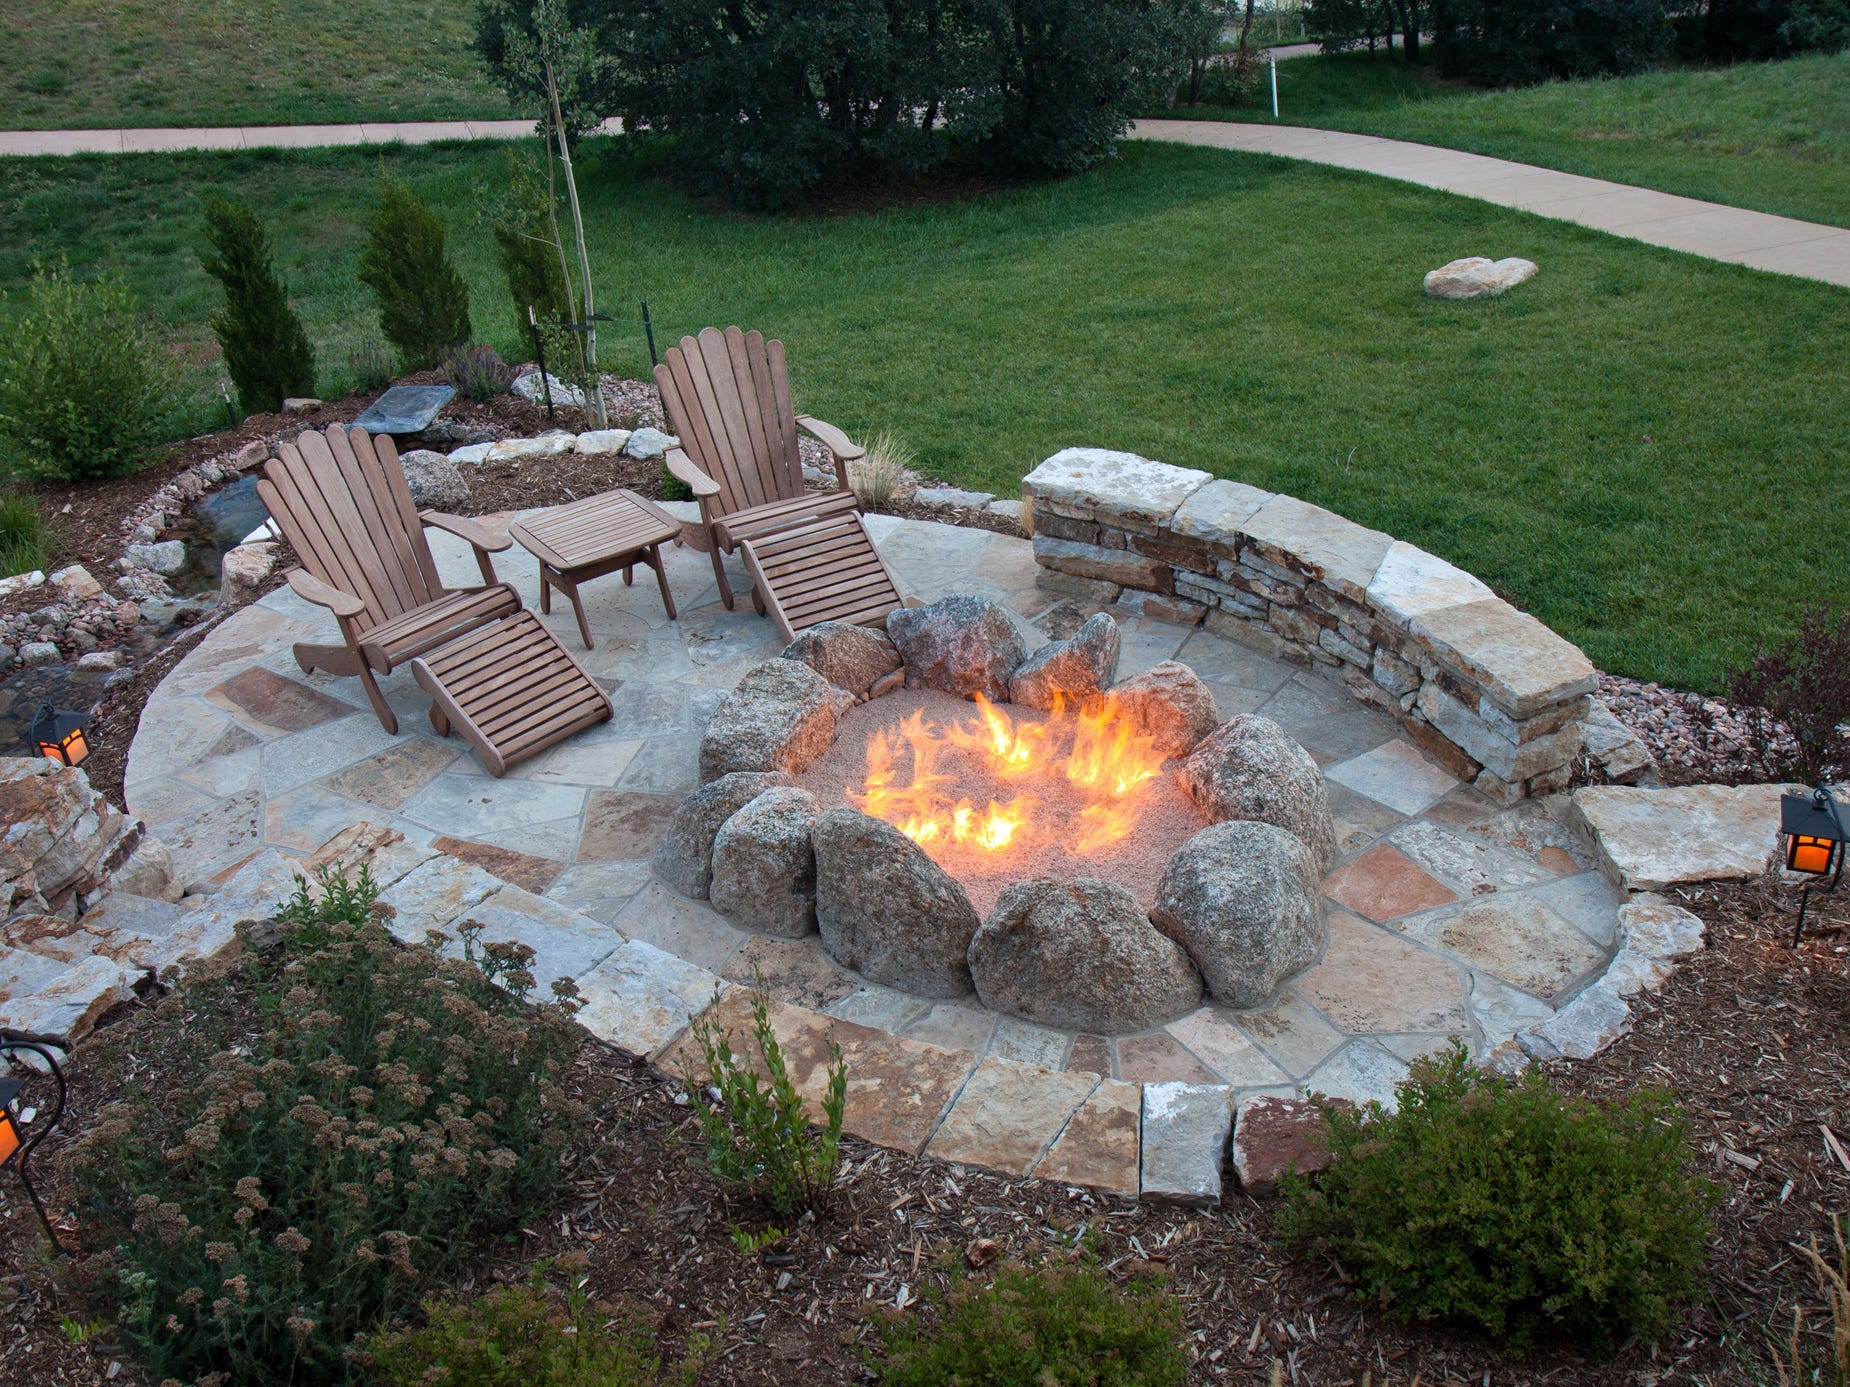 An oval fire pit area with wooden lounge chairs enclosed by a stone wall